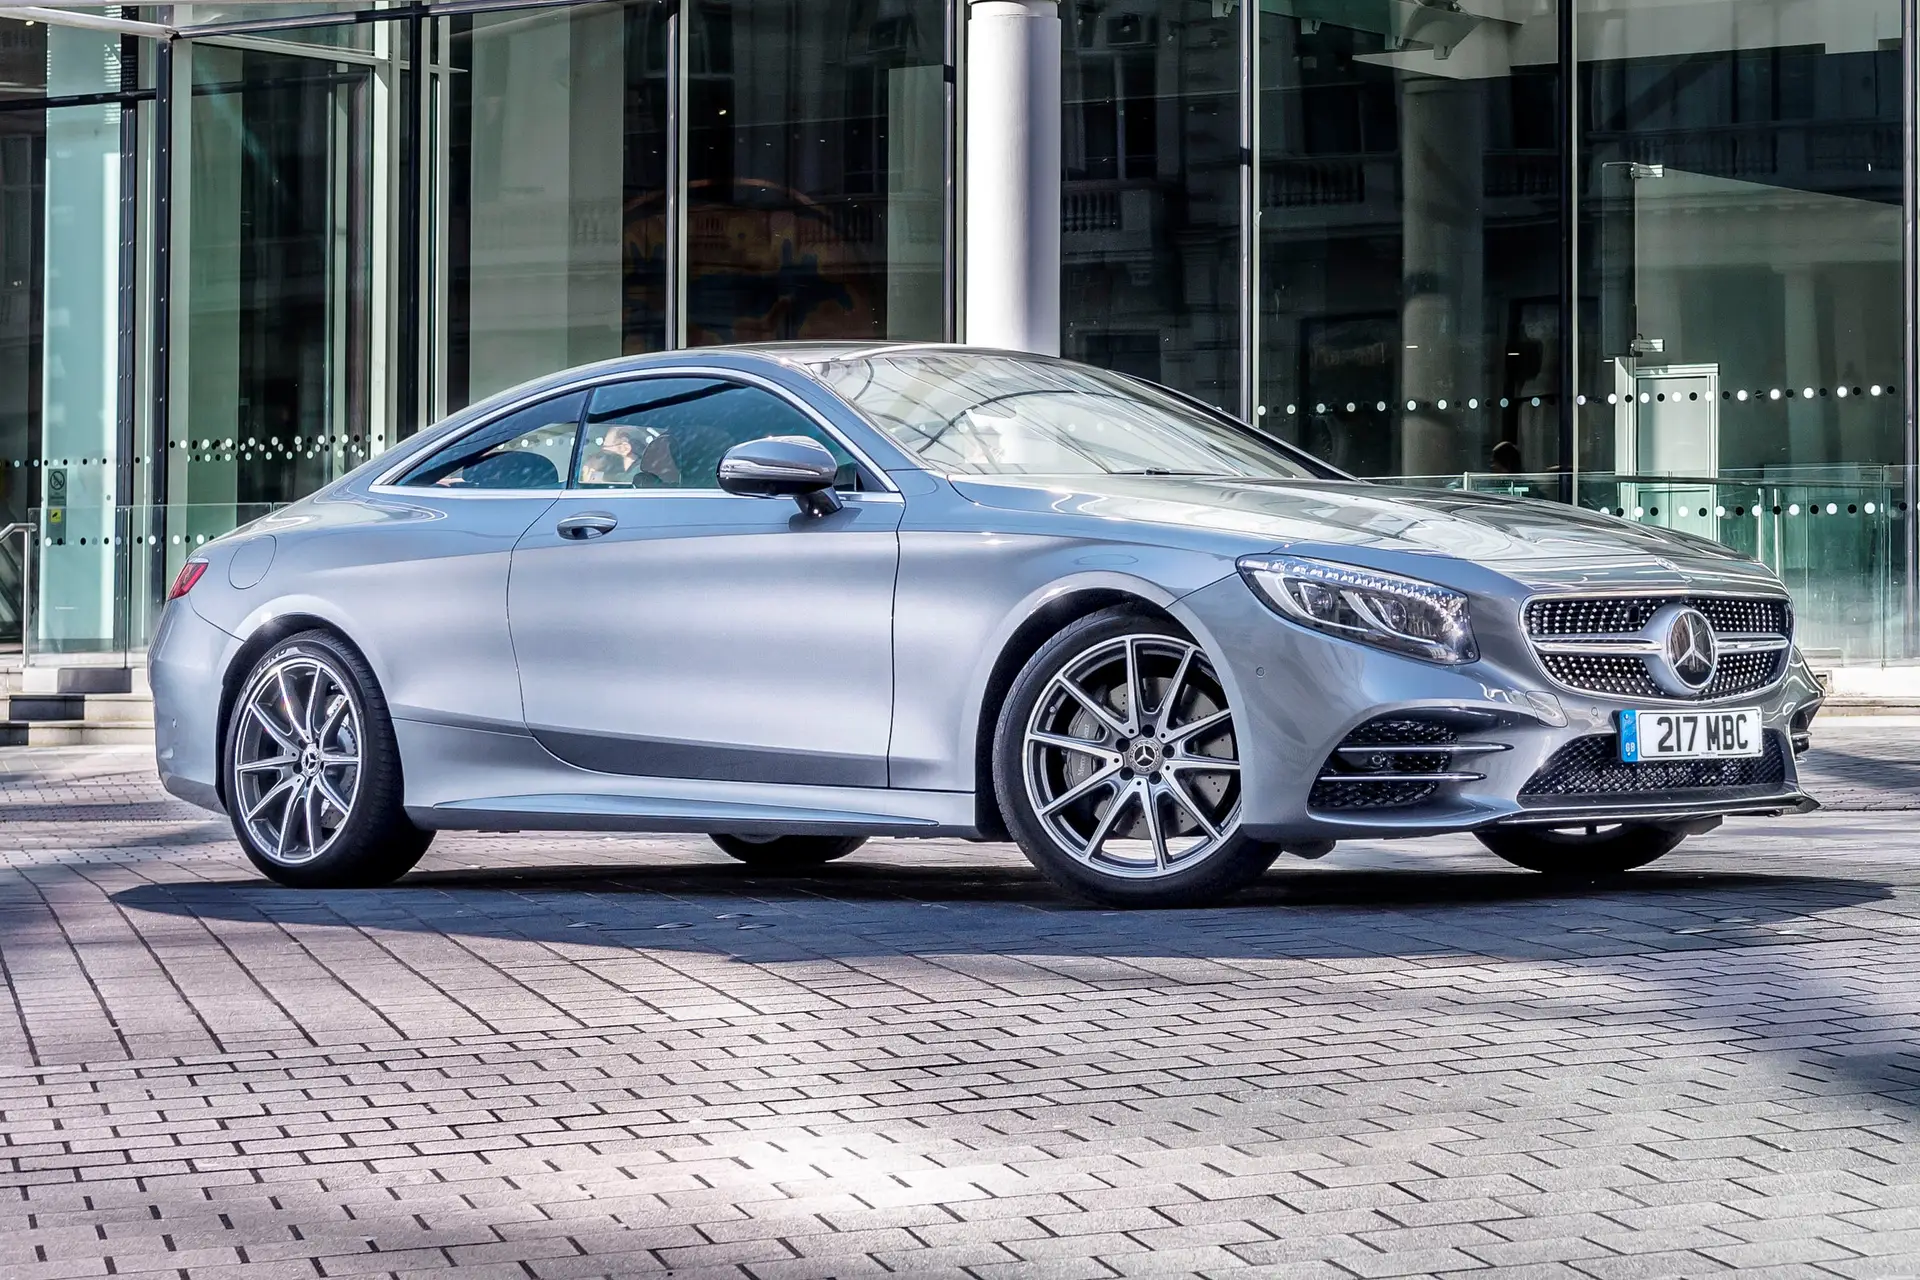 Mercedes S-Class Coupe (2014-2021) Review: exterior front three quarter photo of the Mercedes-Benz S-Class Coupe